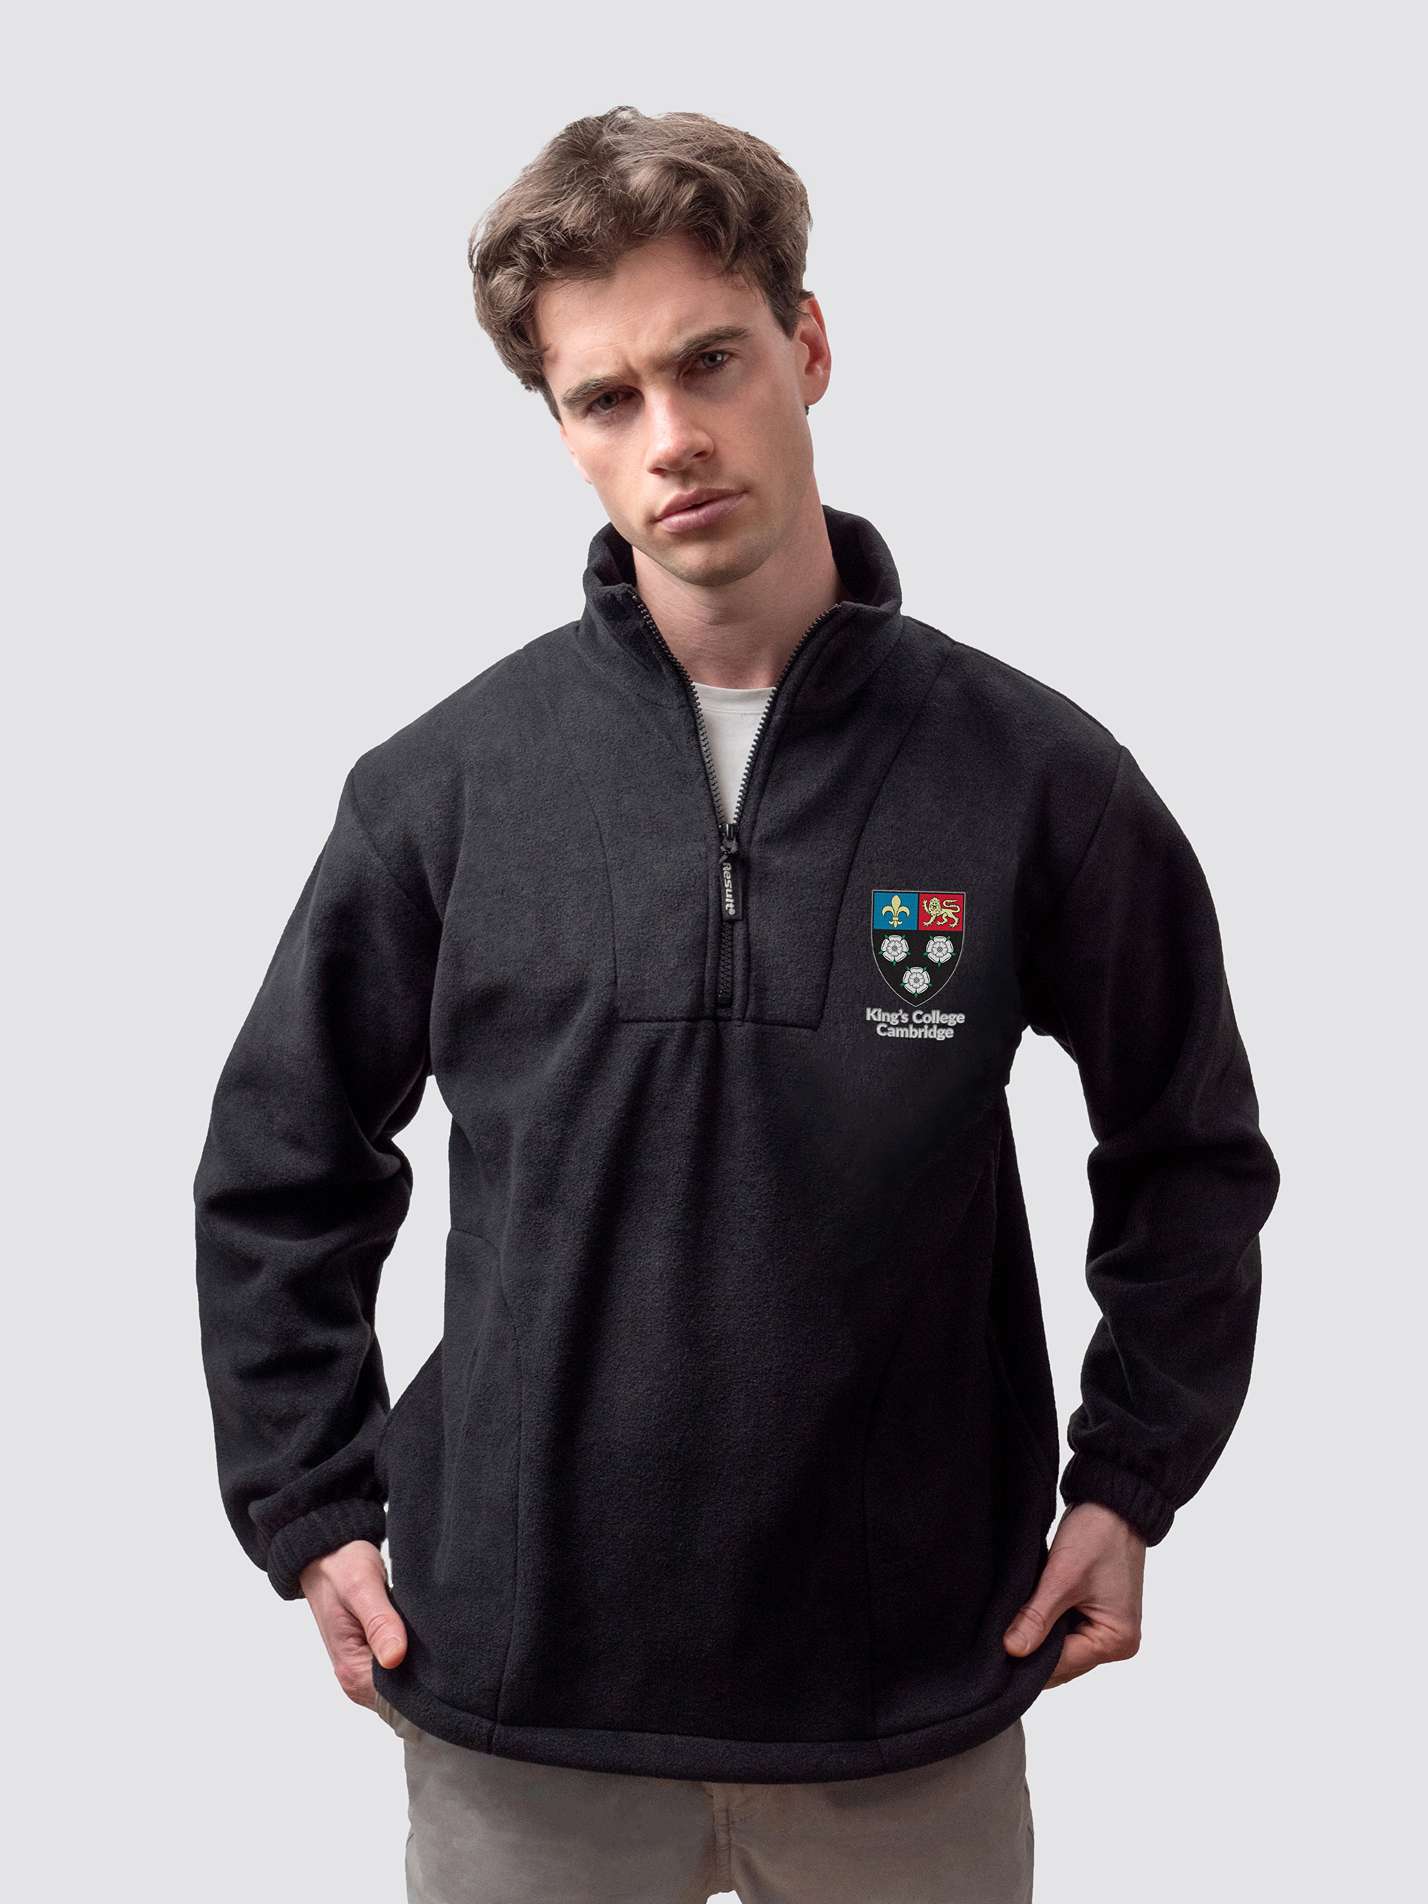 Cambridge university fleece, with custom embroidered initials and King's crest